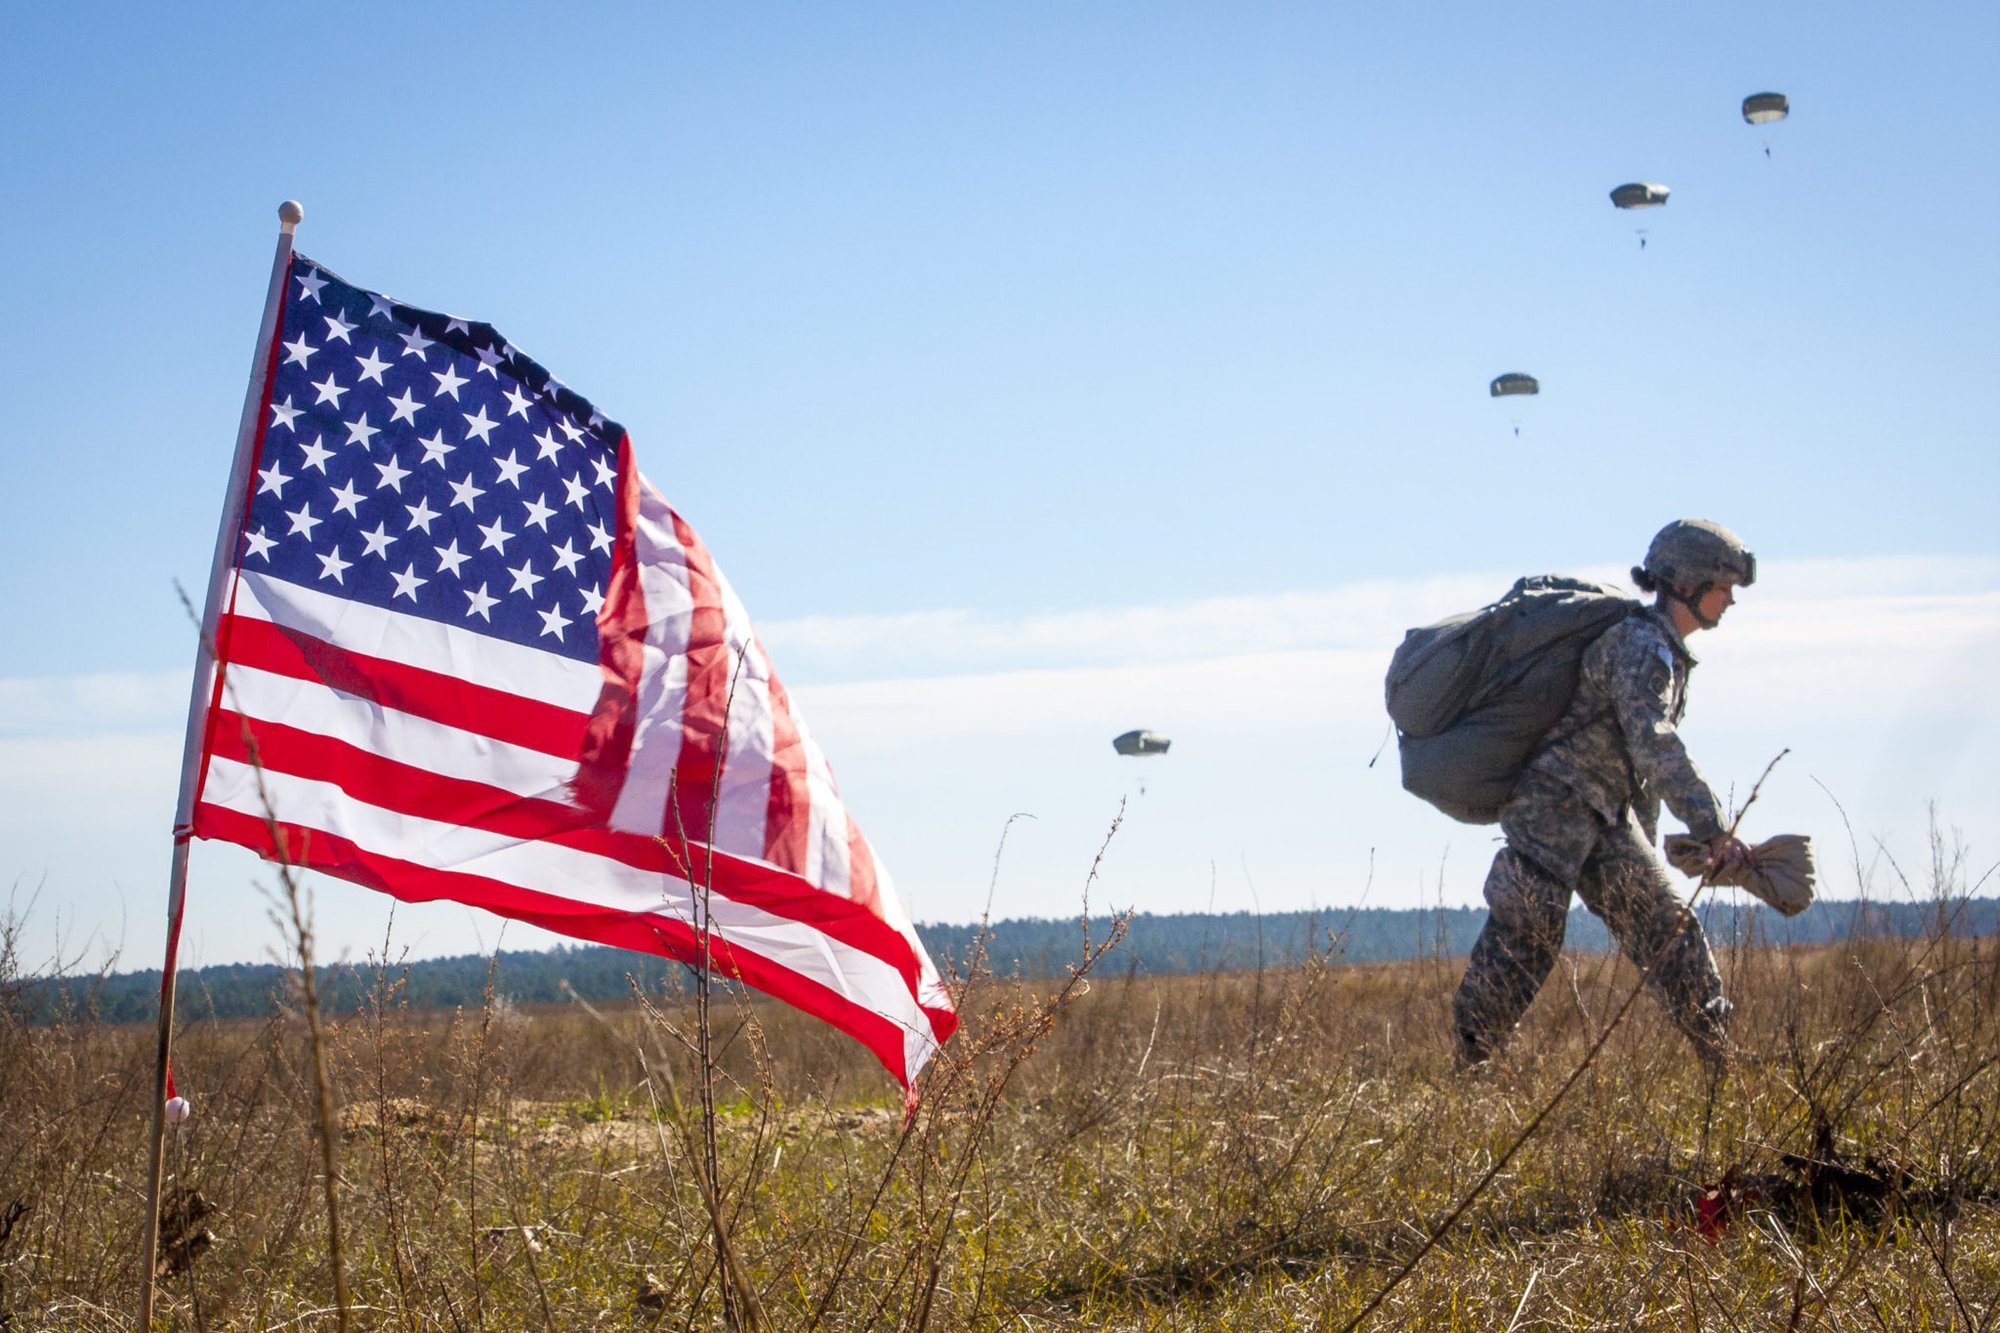 A female paratrooper assigned to the 82nd Airborne Division returns after completing her jump in participation for the 18th Annual Randy Oler Memorial Operation Toy Drop, hosted by U.S. Army Civil Affairs & Psychological Operations Command (Airborne), Dec. 4, 2015, on Sicily Drop Zone at Fort Bragg, N.C. Operation Toy Drop is the world’s largest combined airborne operation and collective training exercise with seven partner-nation paratroopers participating and allows Soldiers the opportunity to help children in need receive toys for the holidays. (U.S. Army photo by Sgt. Destiny Mann, 450th Civil Affairs BN Airborne)